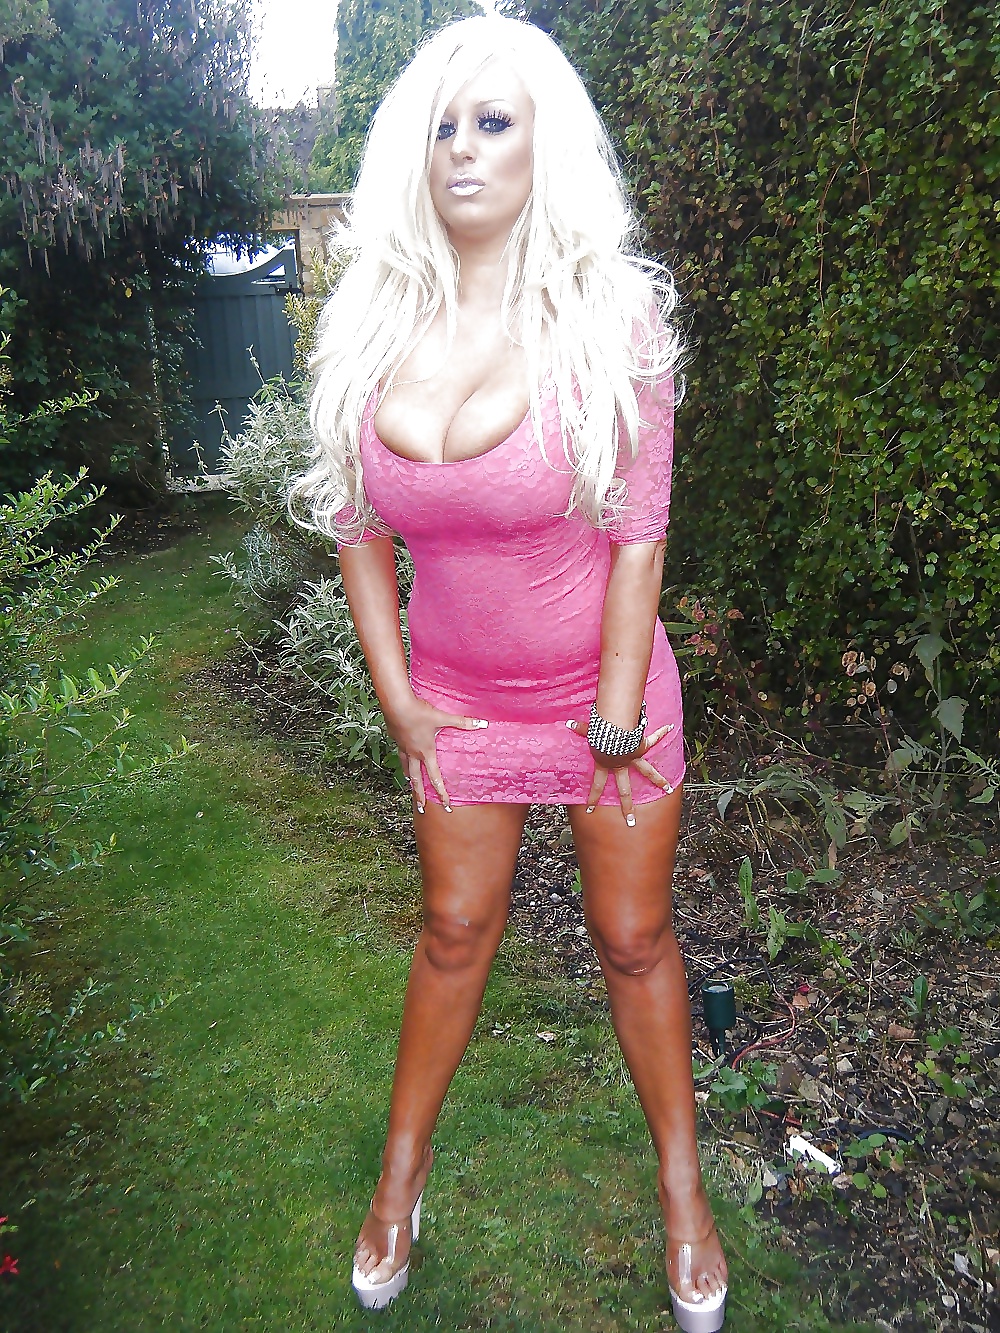 Sex The hottest chavs, slags, sluts and bimbo collection#2 image